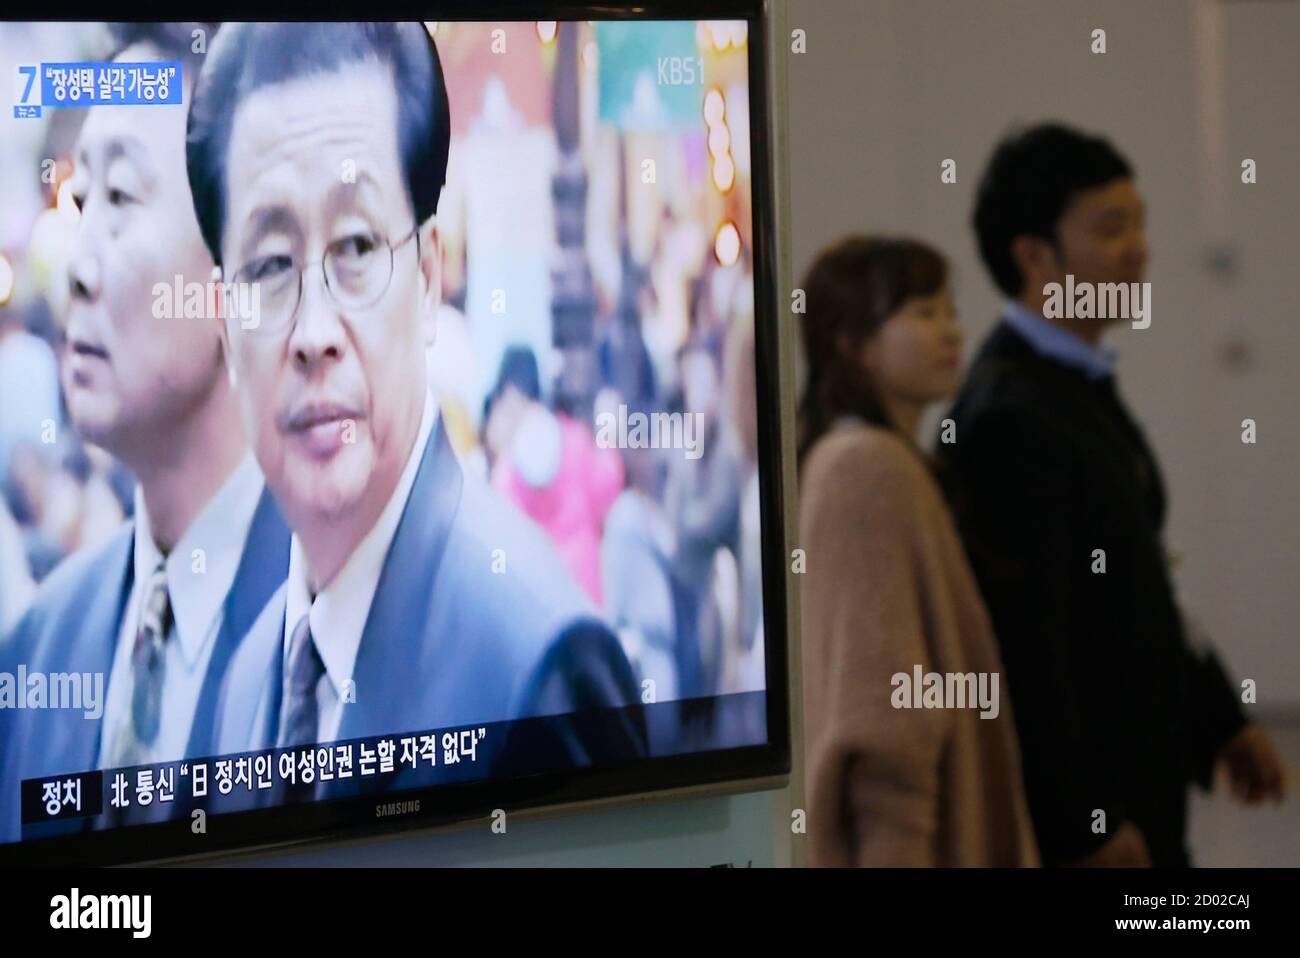 A couple walks past a television showing a report on Jang Song Thaek, North  Korean leaders' uncle, at a railway station in Seoul December 3, 2013.  North Korean leader Kim Jong Un